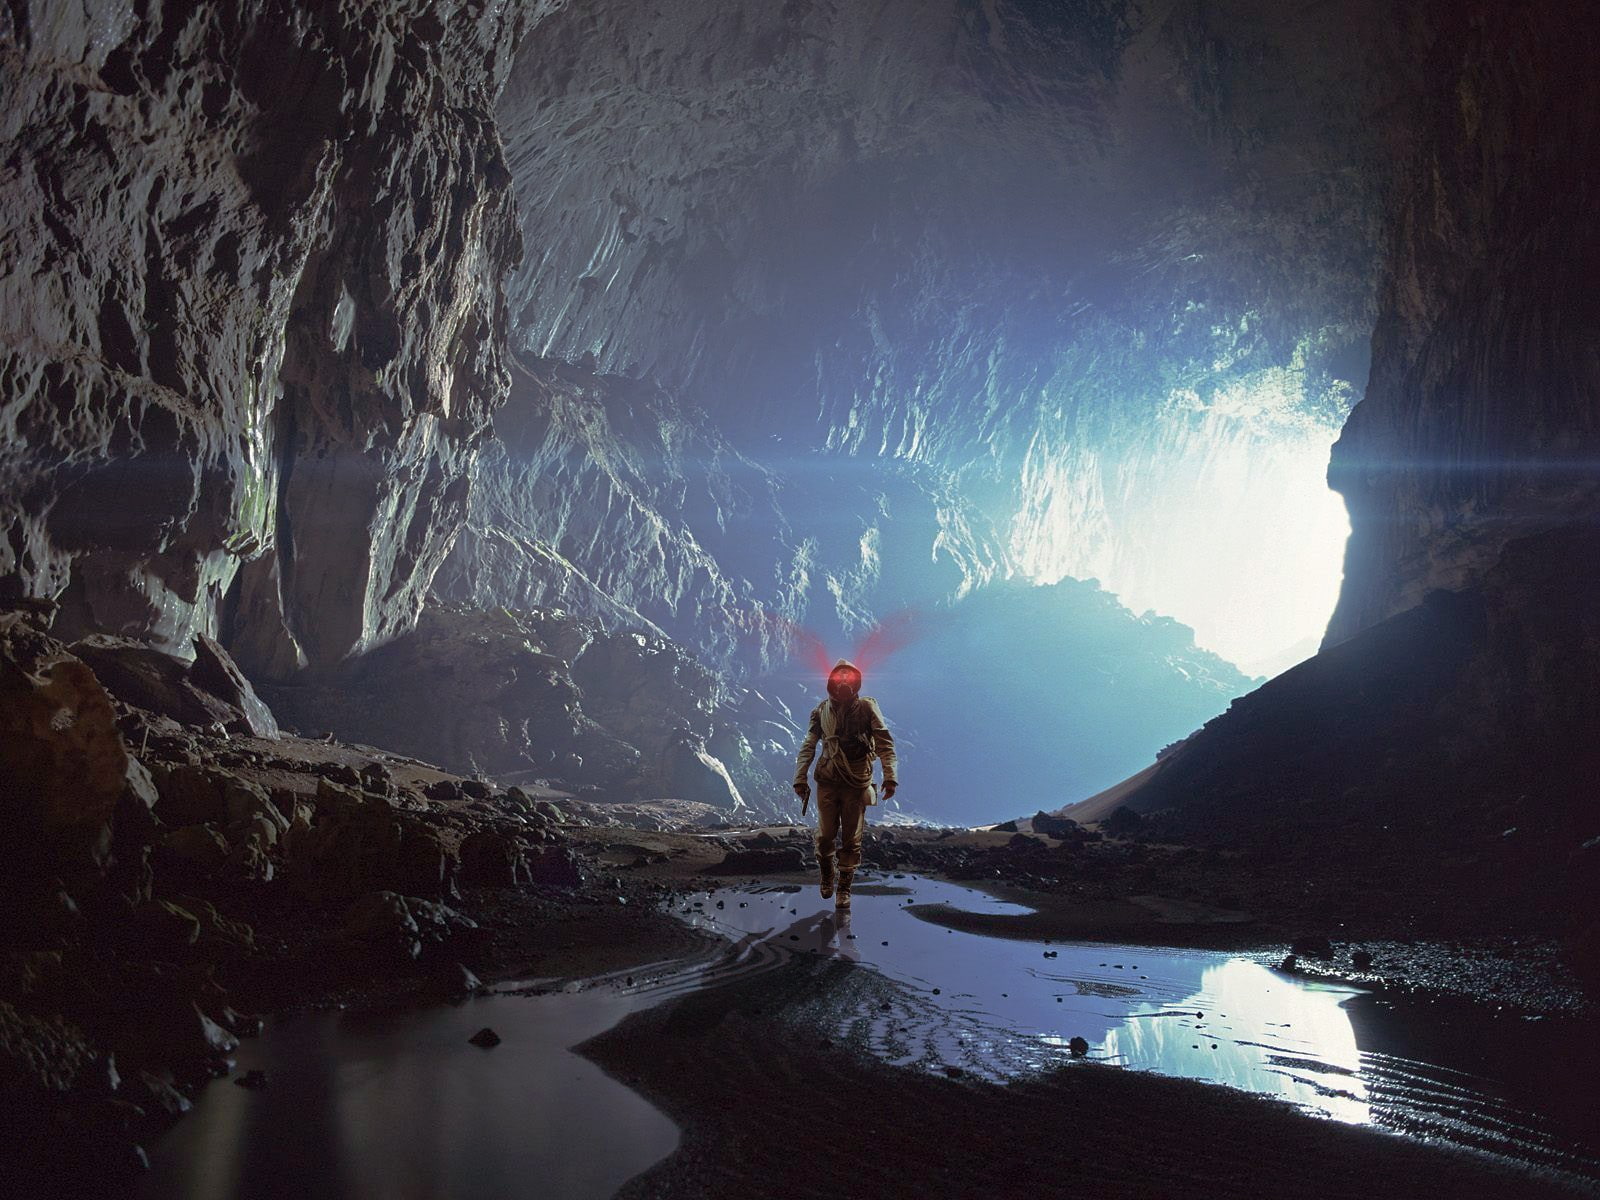 cave, one person, water, beauty in nature, mountain, standing